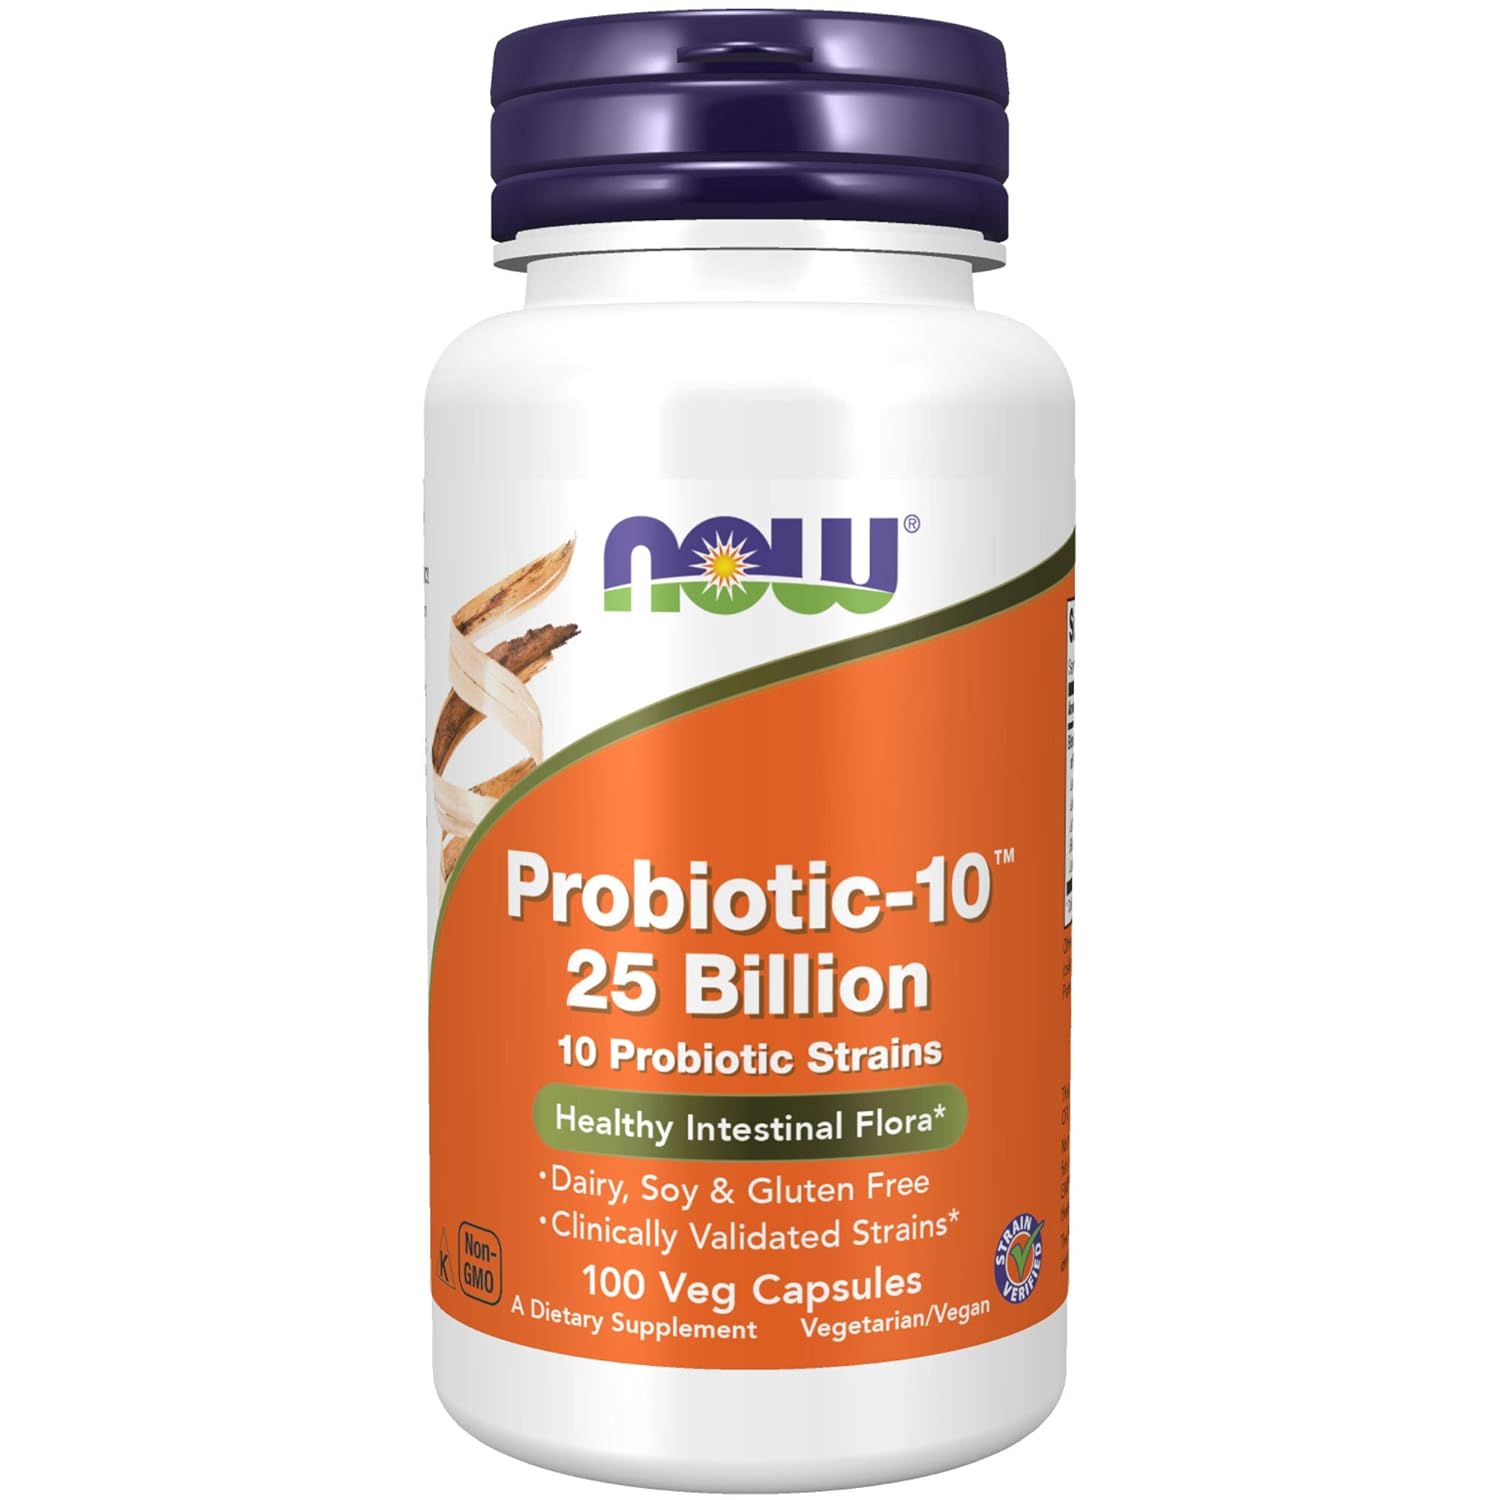  NOW Supplements, Probiotic-10, 25 Billion, with 10 Probiotic Strains, Dairy, Soy and Gluten Free, Strain Verified, 100 Veg Capsules